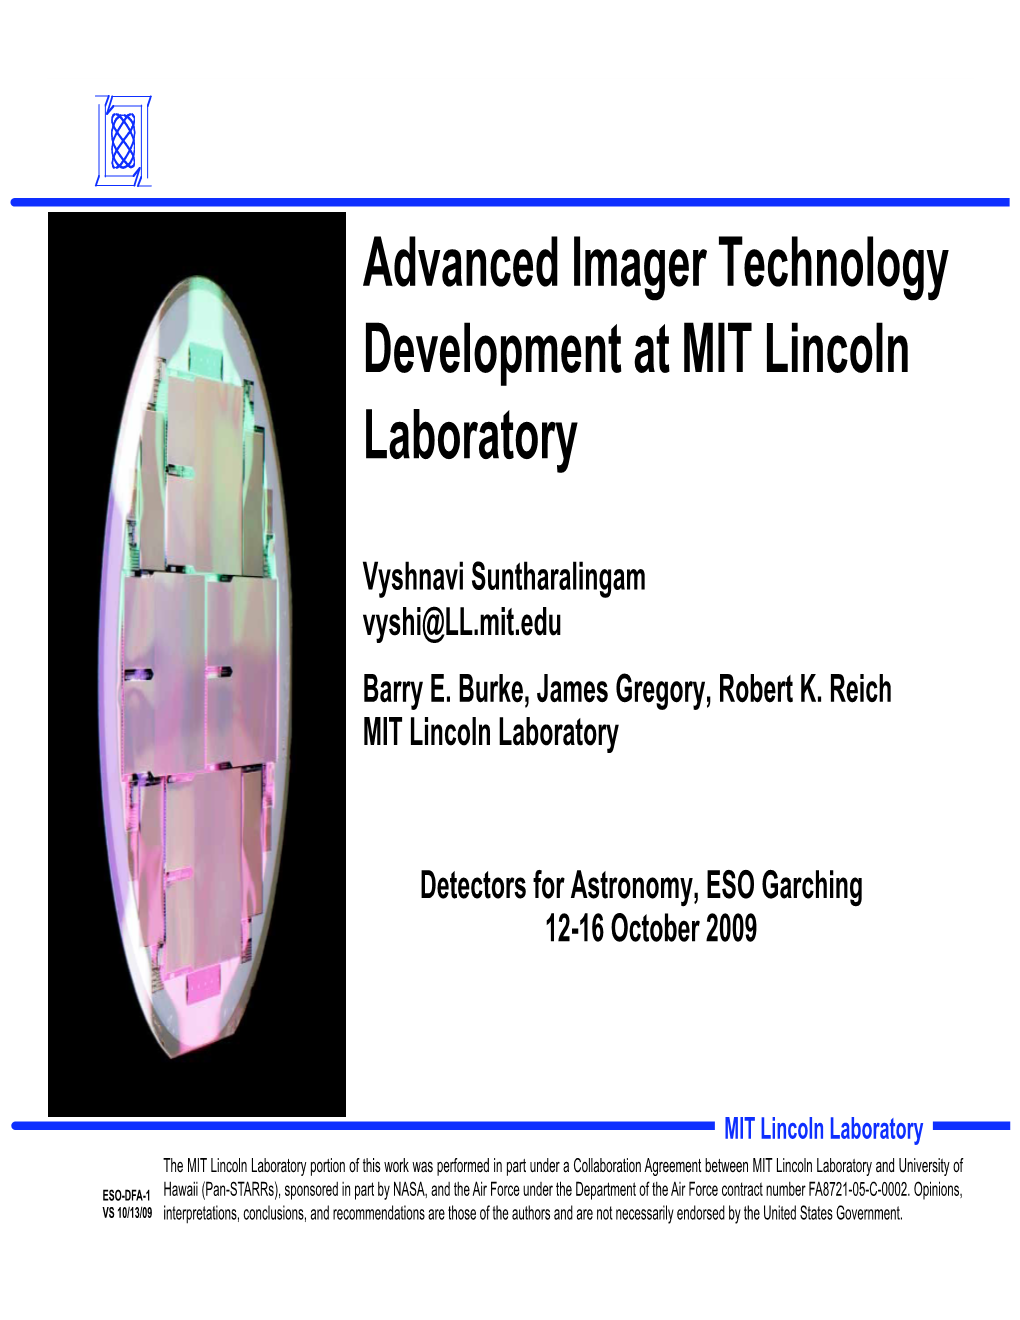 Advanced Imager Technology Development at MIT Lincoln Laboratory